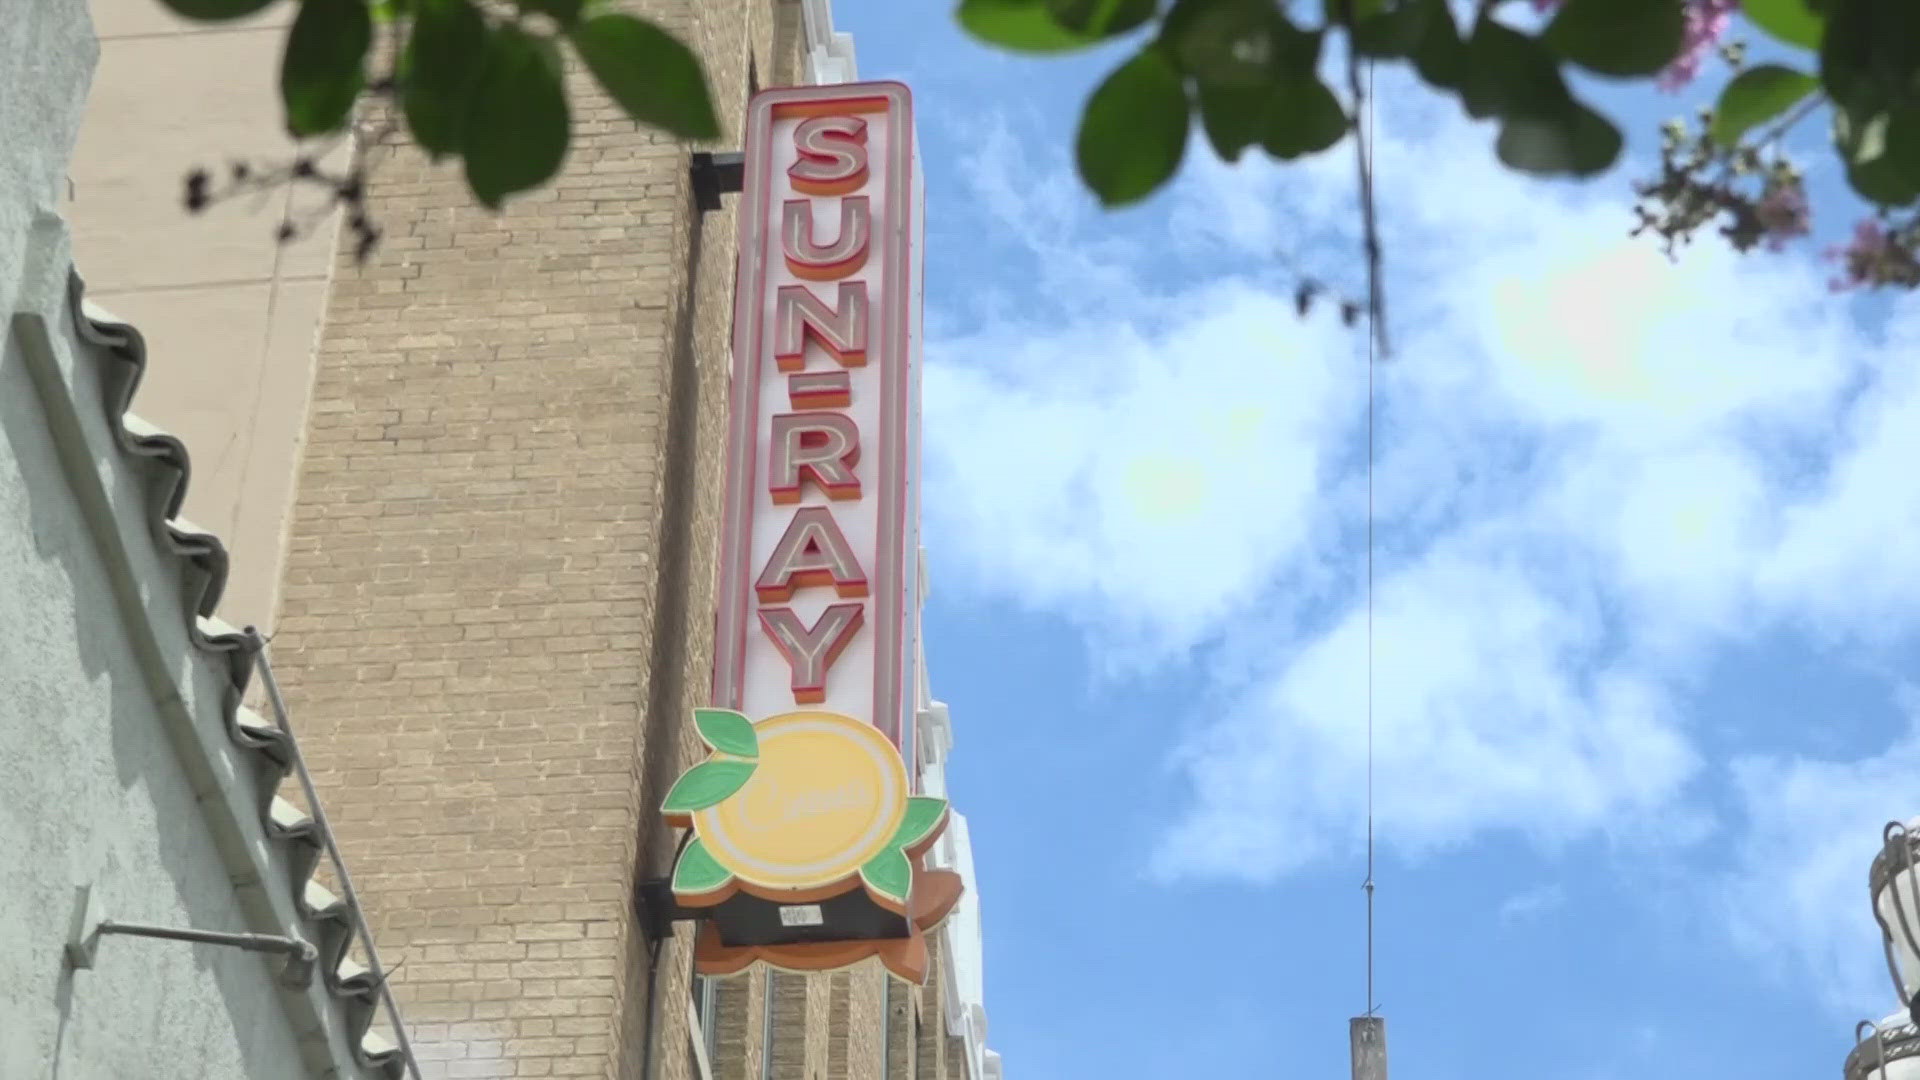 Union South Partners explained why it won't be renewing Sun-Ray Cinema's lease, and why the future for the space it was in is still undecided.